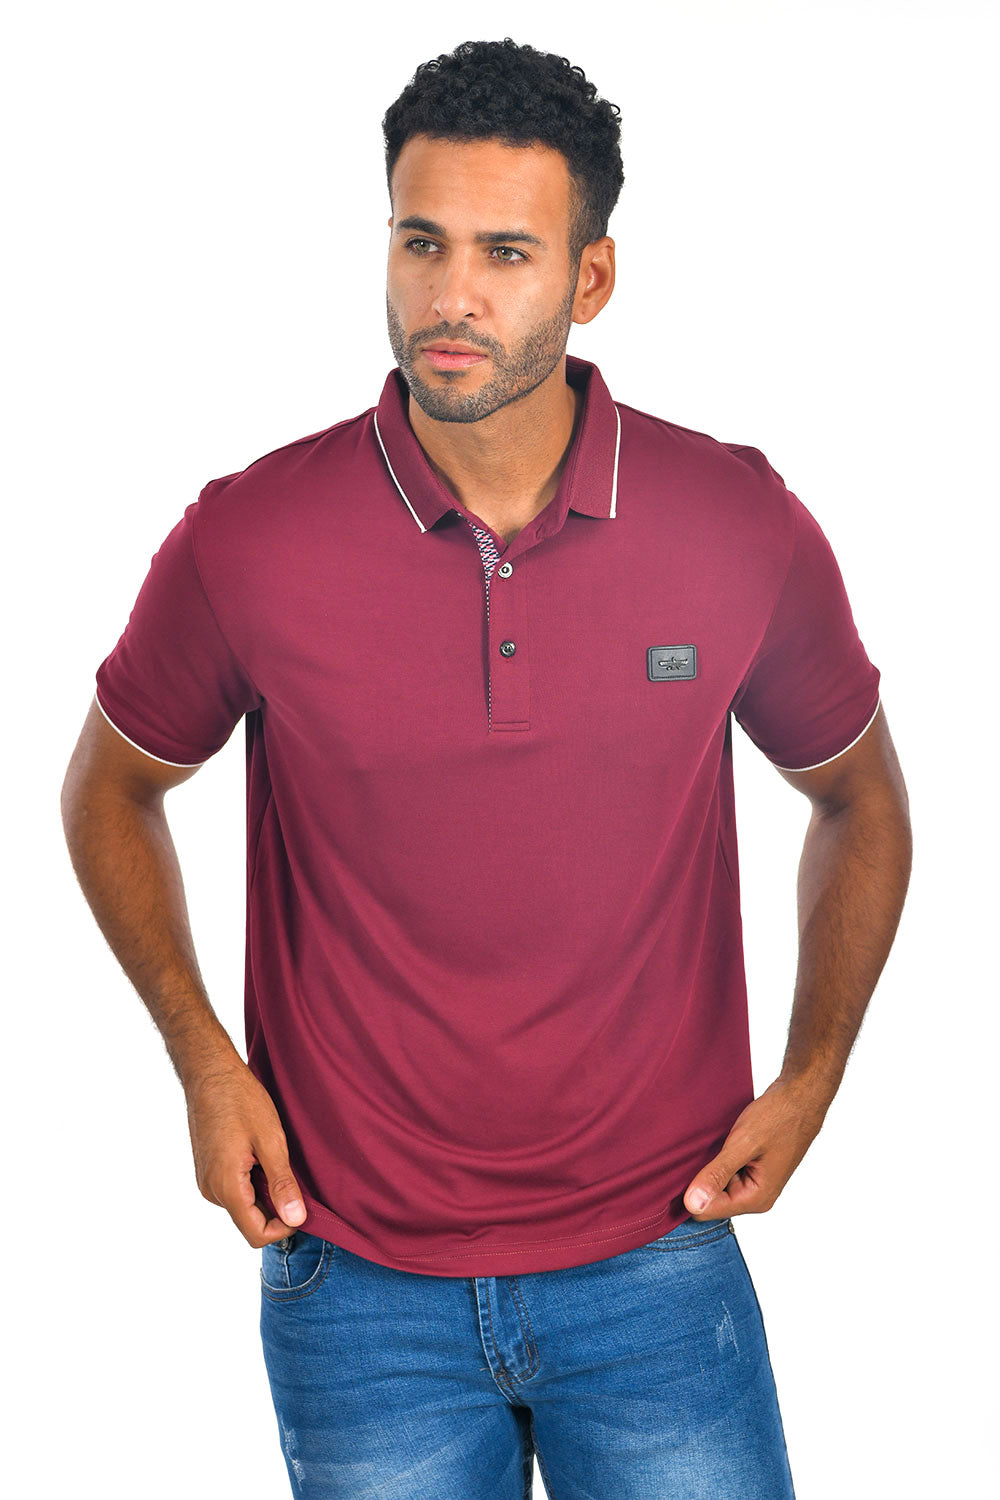 BARABAS Men's Solid Color Printed Graphic Tee Polo Shirts PP821-1 | eBay